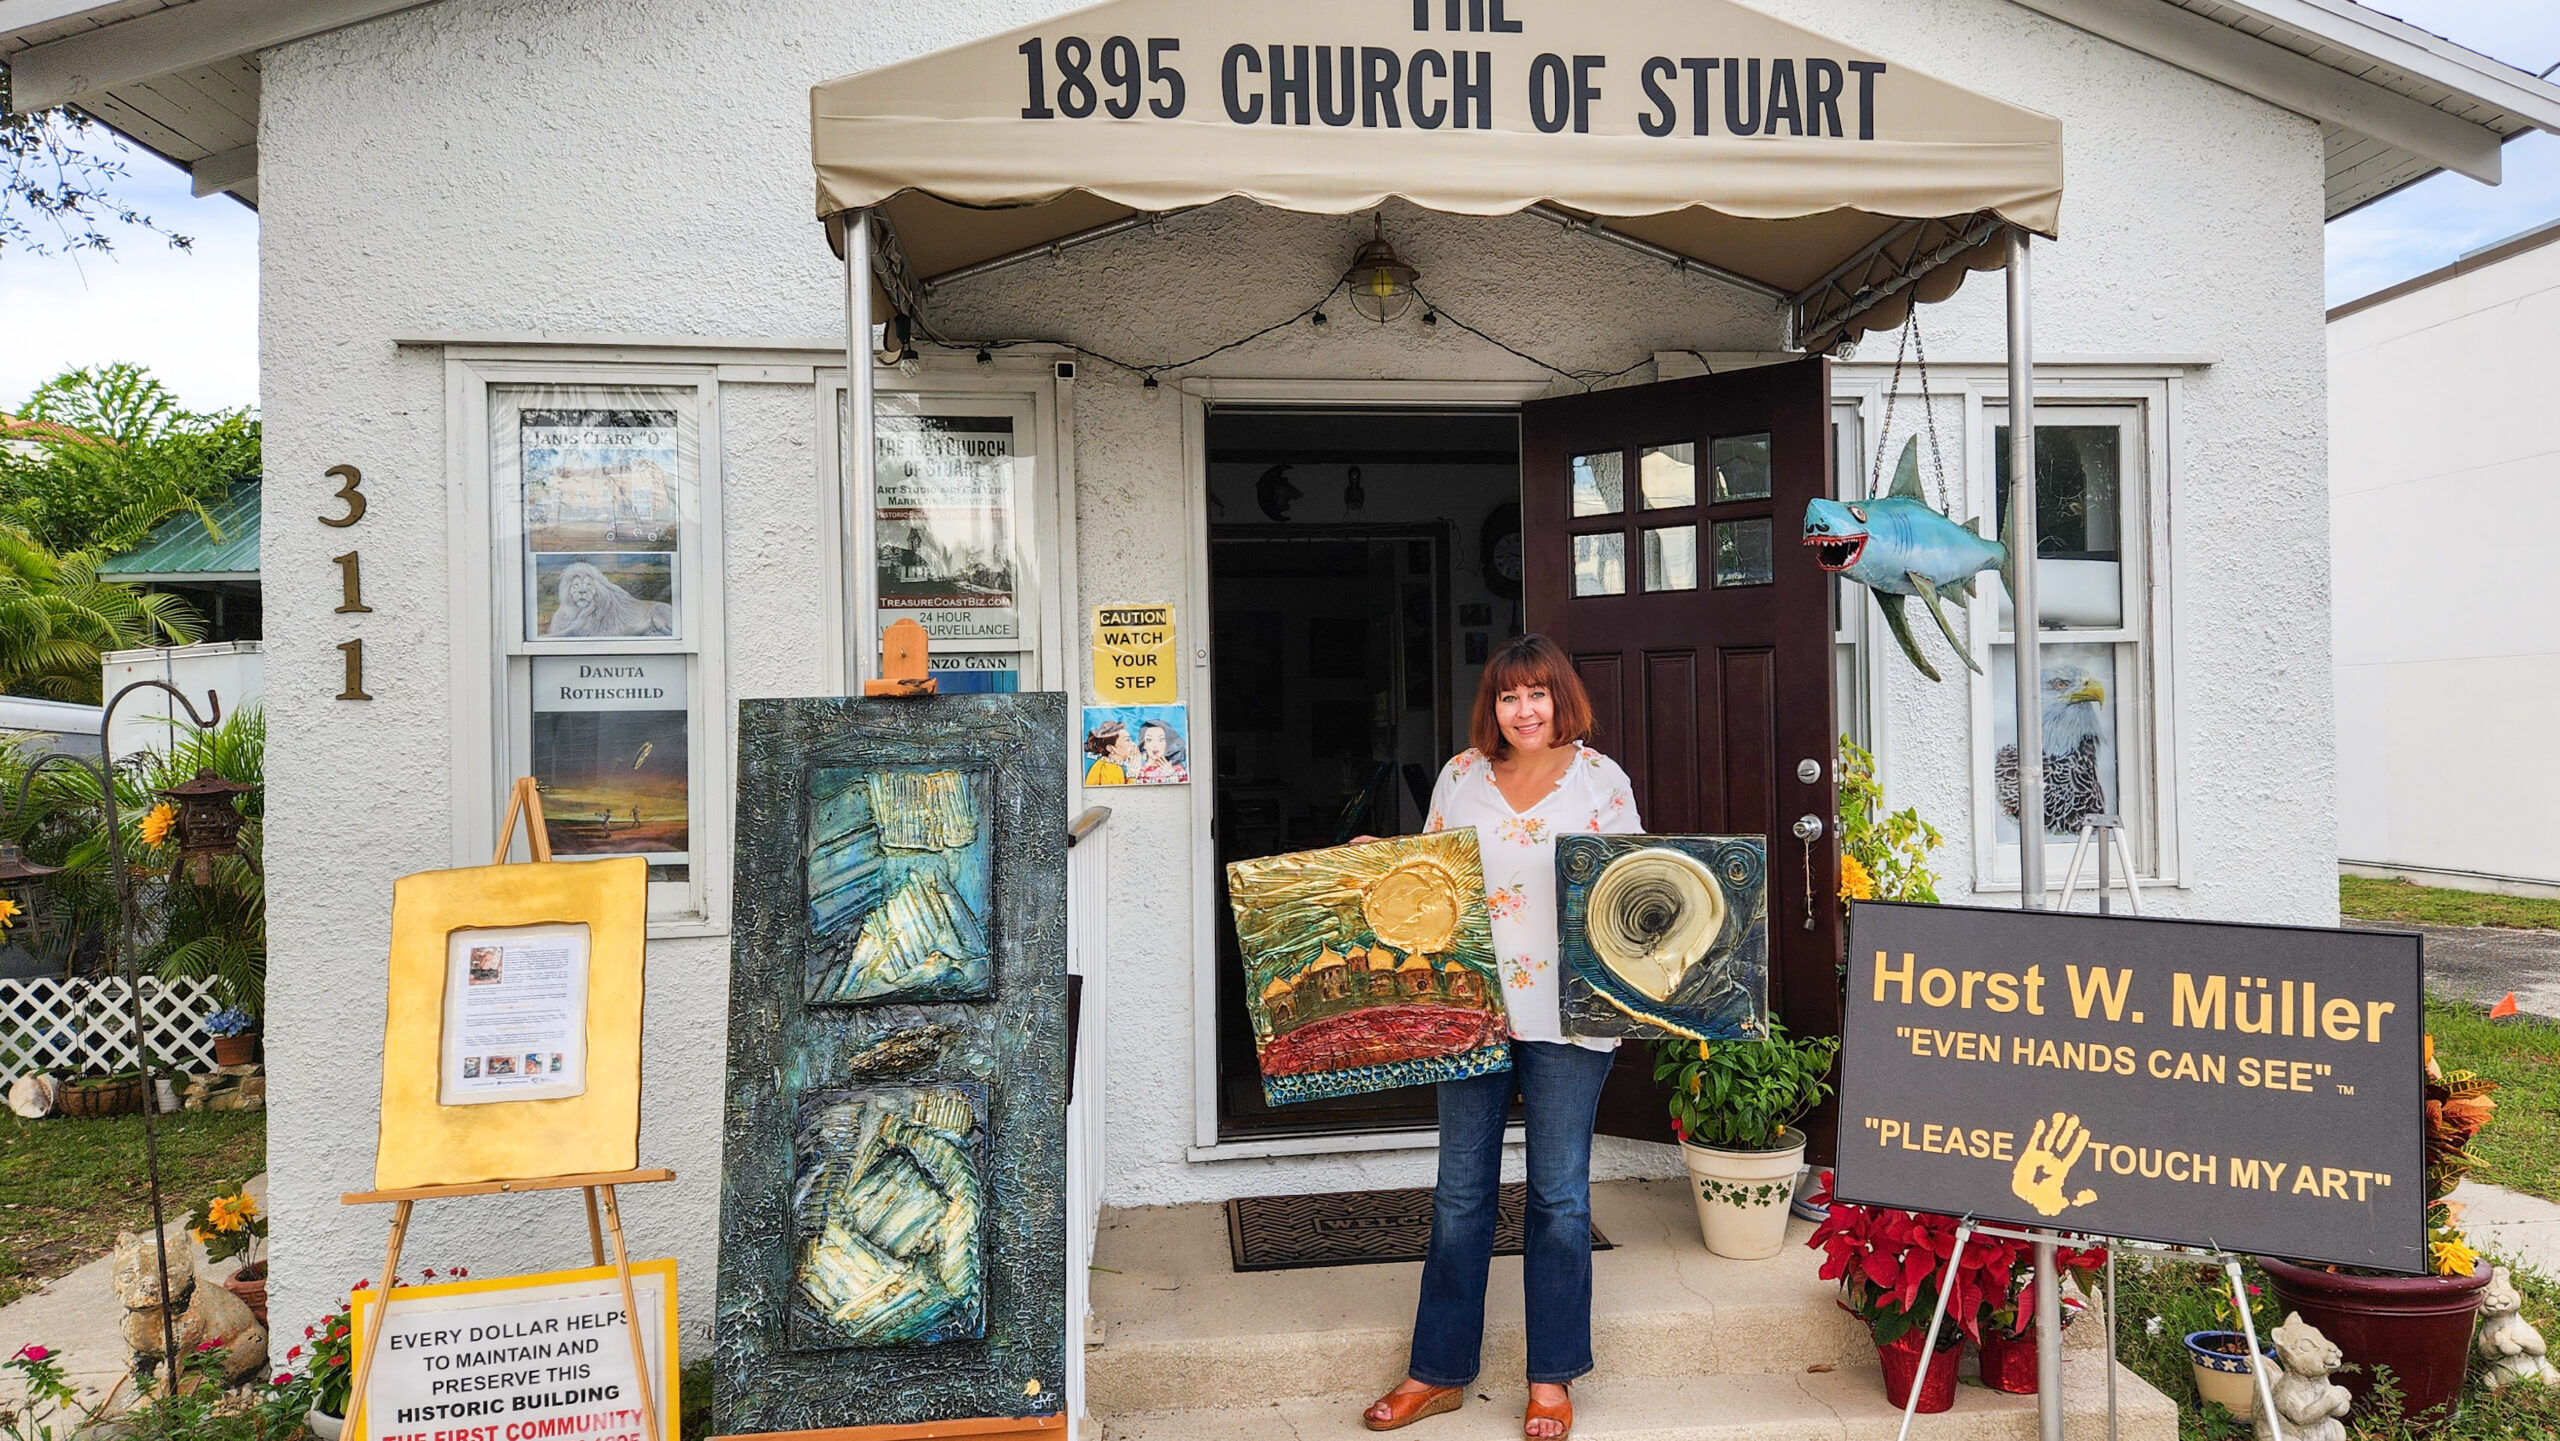 The 1895 Church of StuArt, historical building of the first community church, also known as the pioneer church, built in Stuart in 1895. Local history and art. Fine art studio in Downtown Stuart, Florida. Tectile Art by Horst Mueller - Please Touch My Art